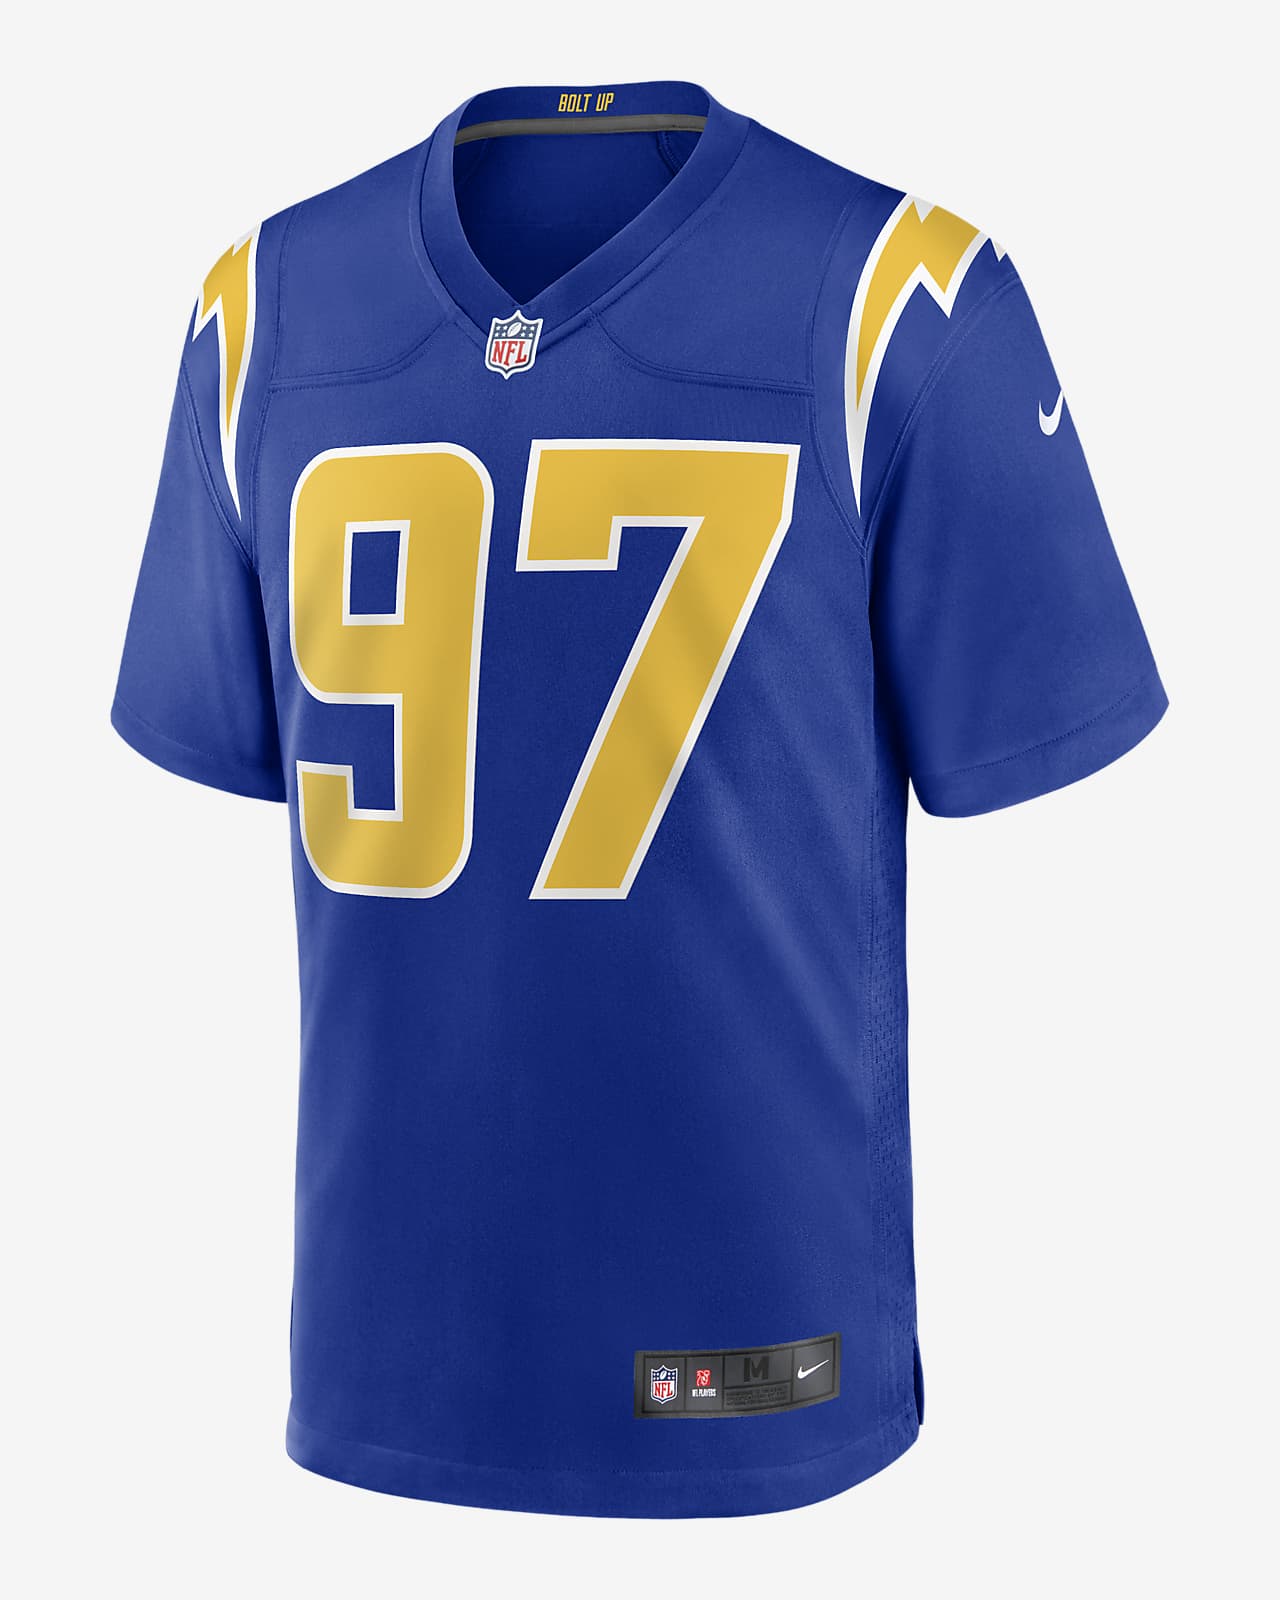 NFL Los Angeles Chargers (Joey Bosa) Men's Game Football Jersey. Nike.com